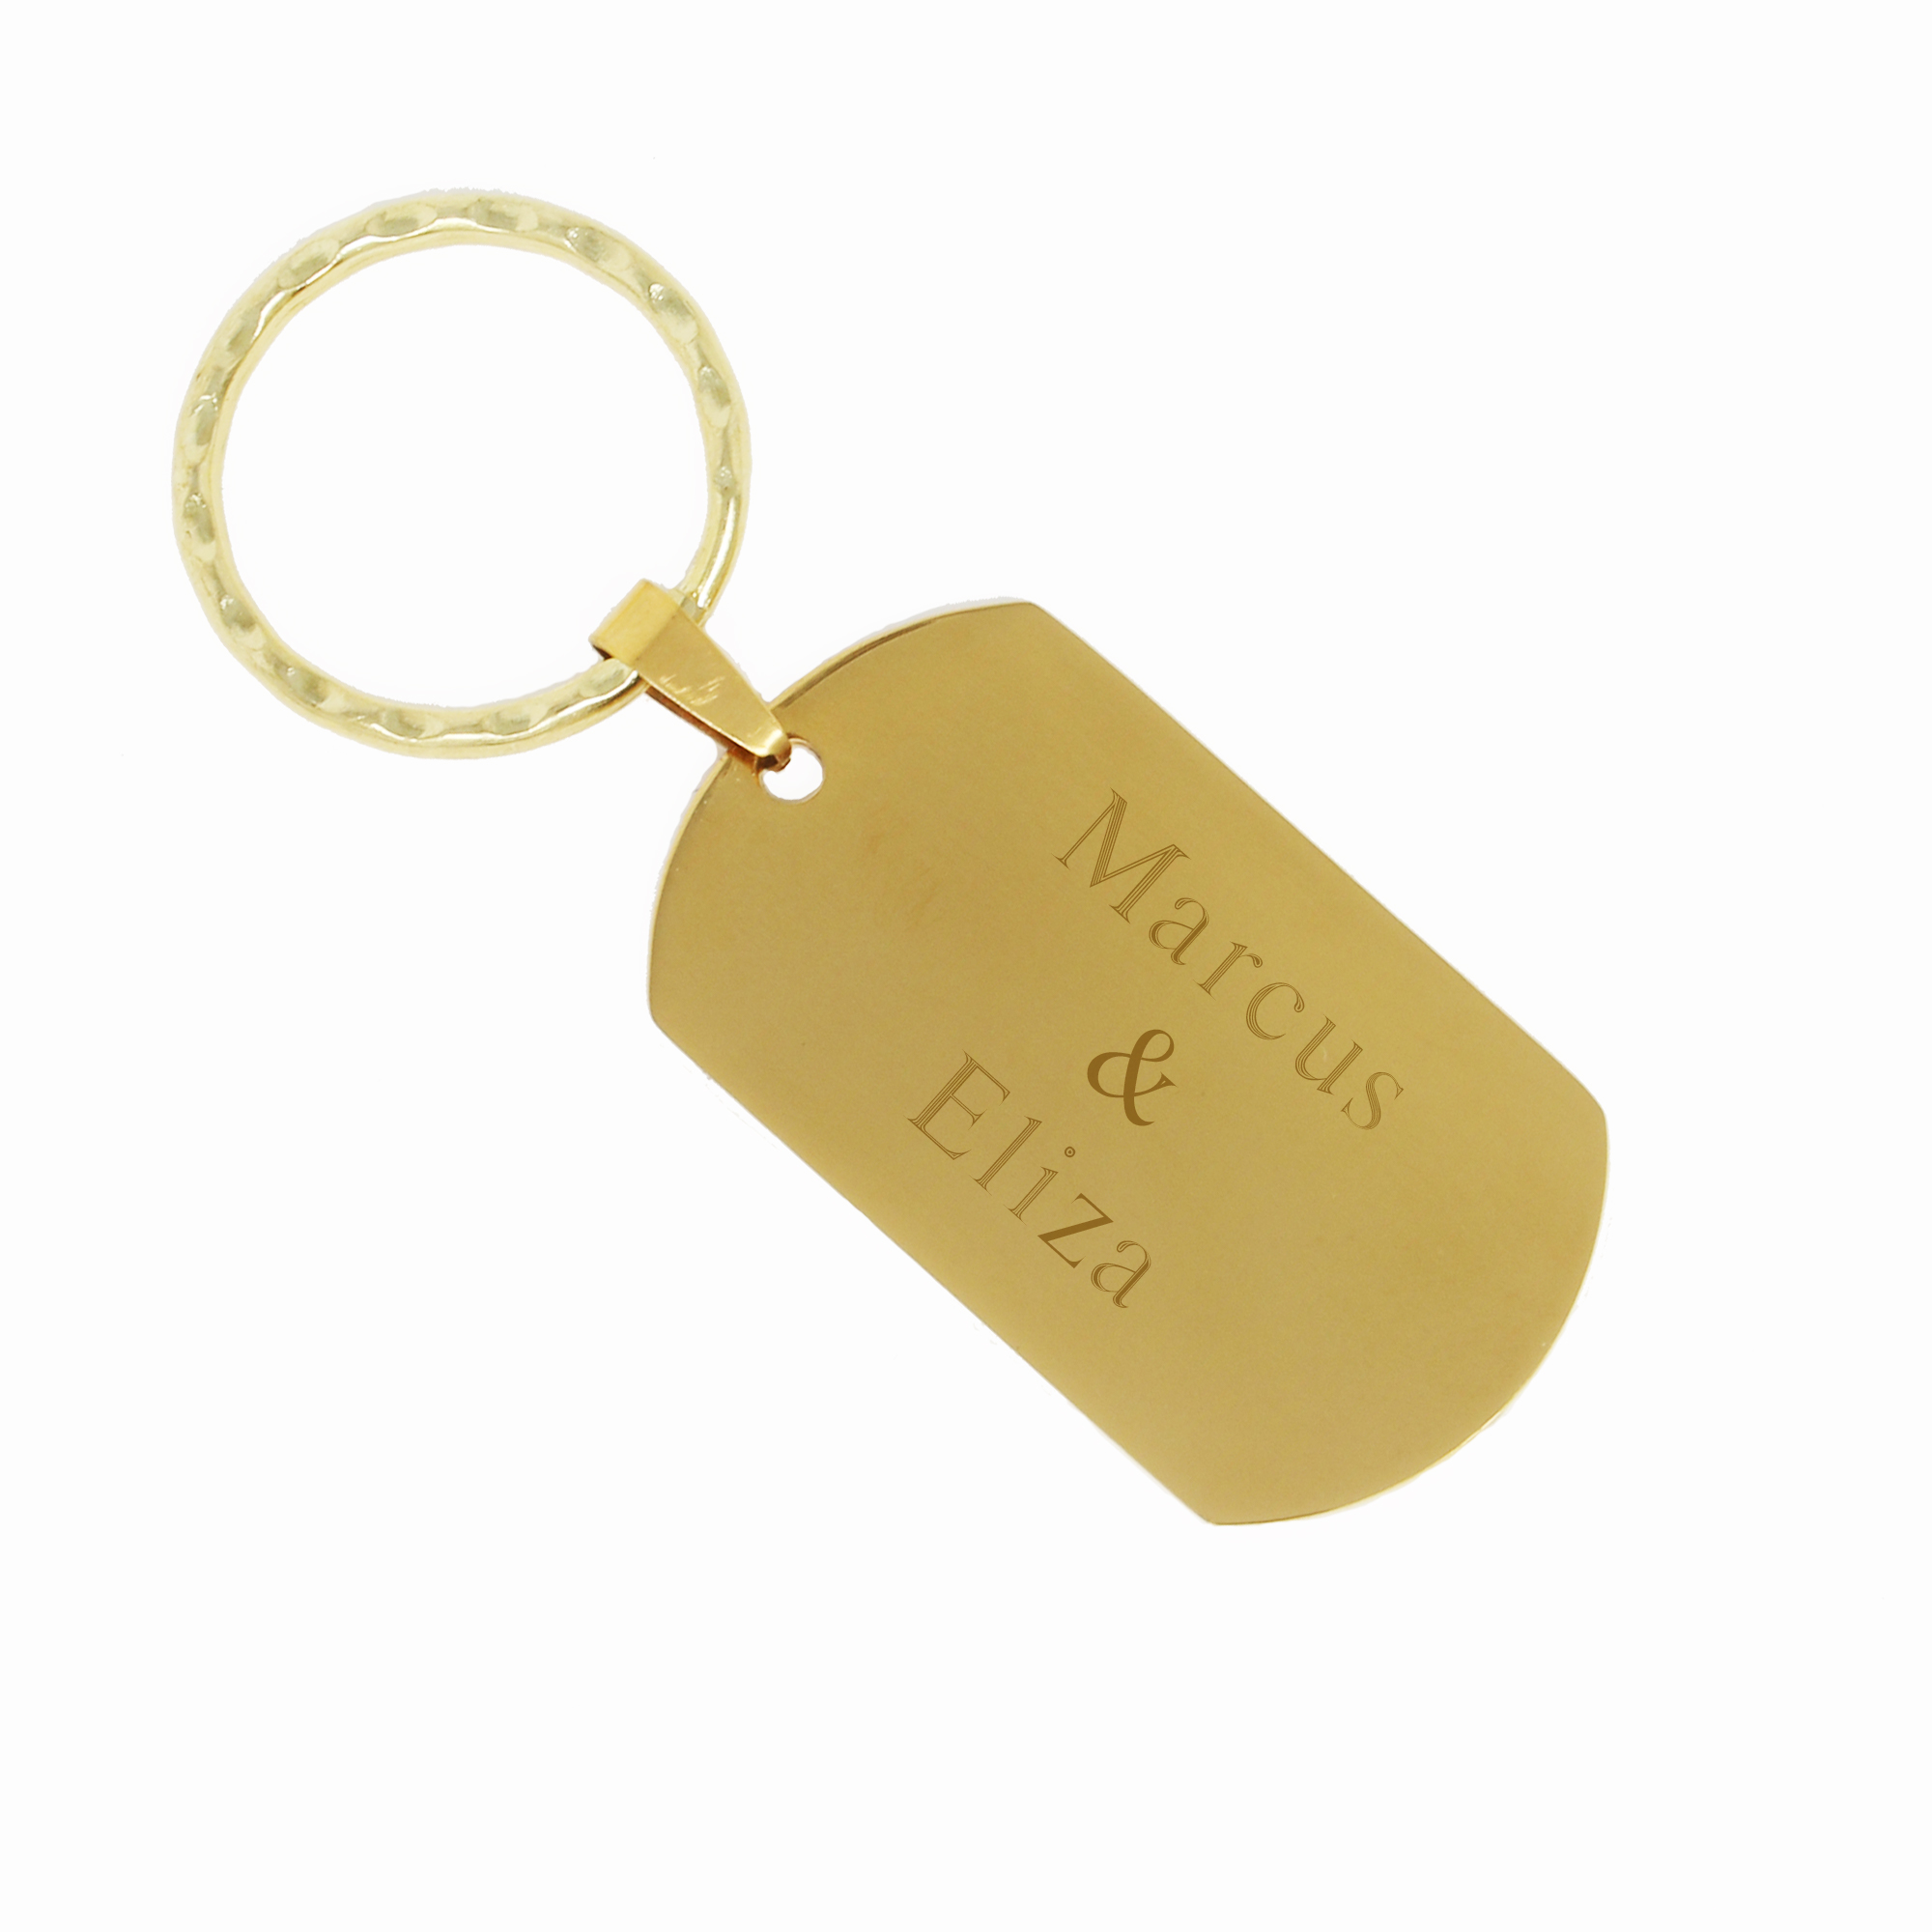 Luxury Key Ring Peter Gold-Plated Gold Name Key Chain Christmas Gift 